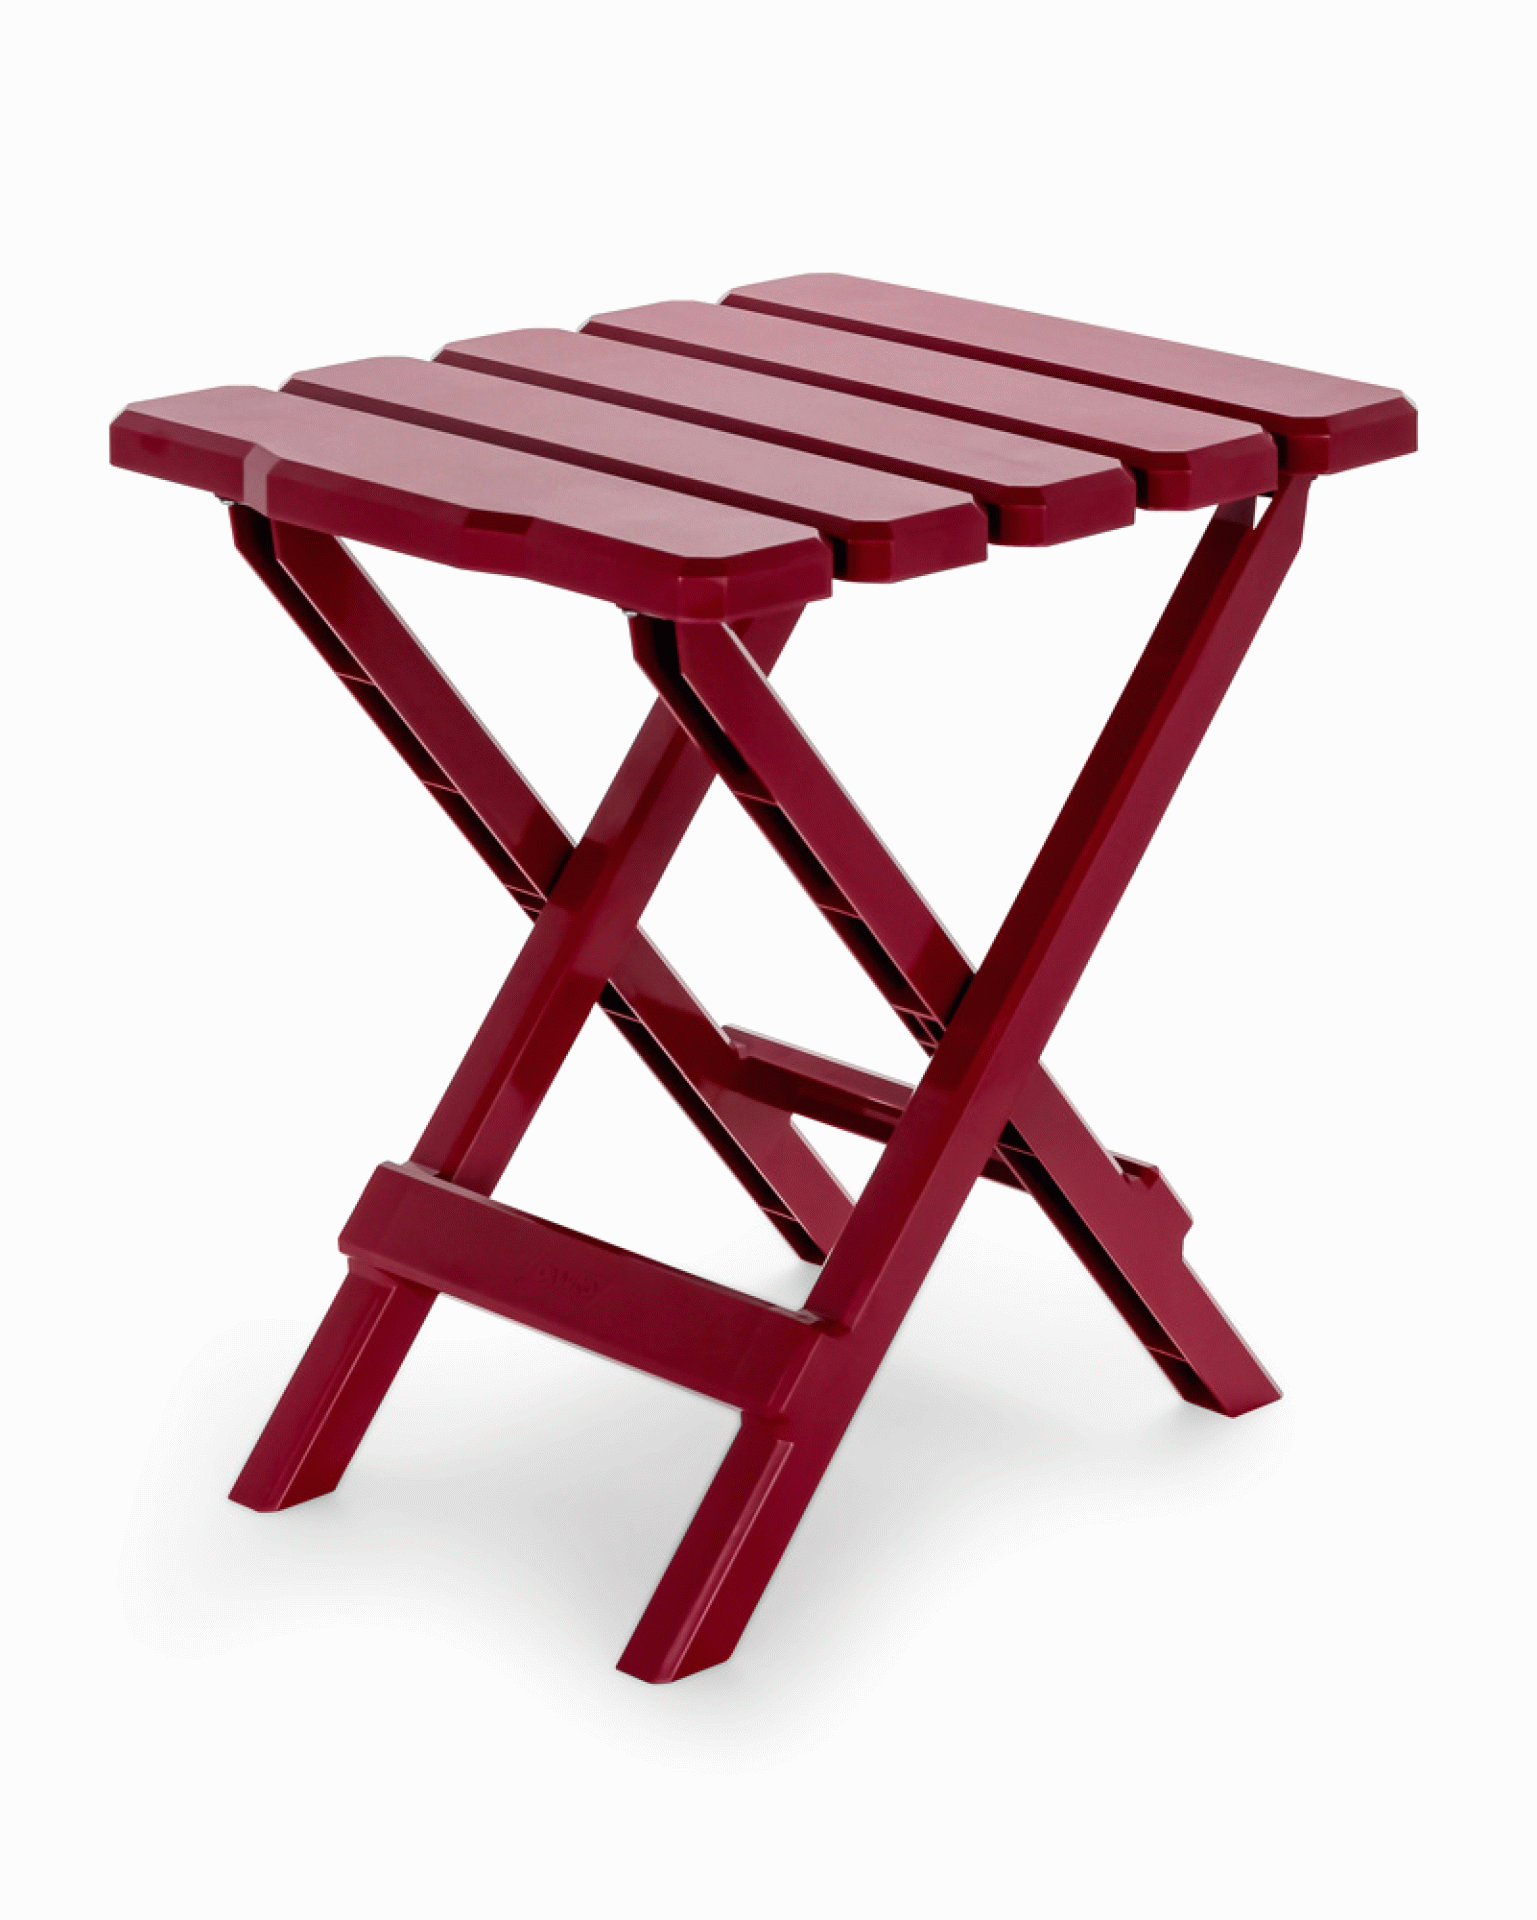 CAMCO MFG INC | 51684 | Small Adirondack Style Folding Table - Red